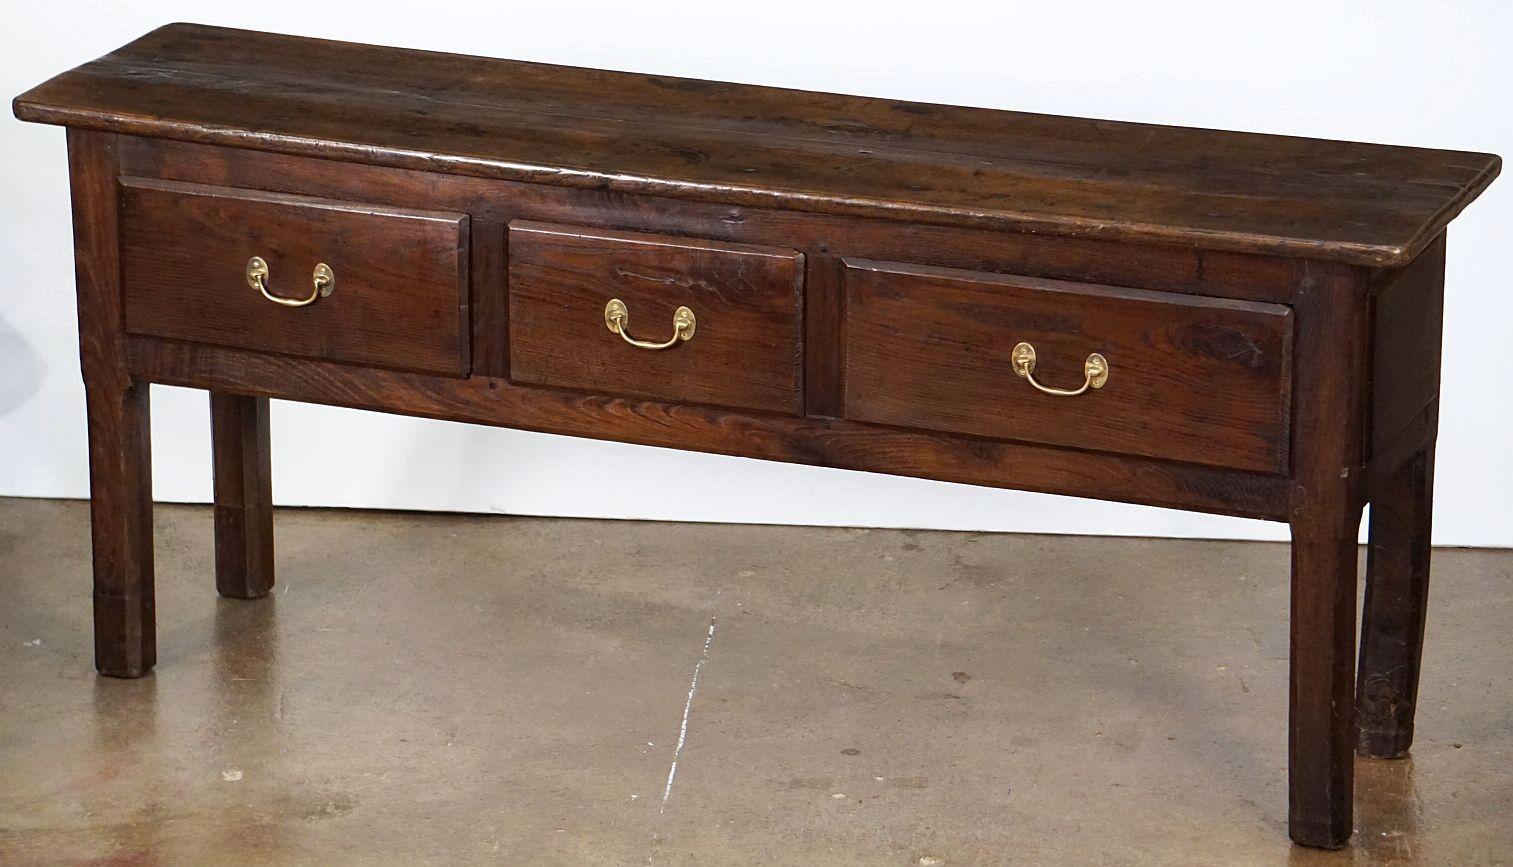 A handsome French console sideboard or serving table of patinated chestnut wood, featuring a plank top over a paneled frieze with three drawers, each with brass hardware pulls, and resting on four chamfered legs.

